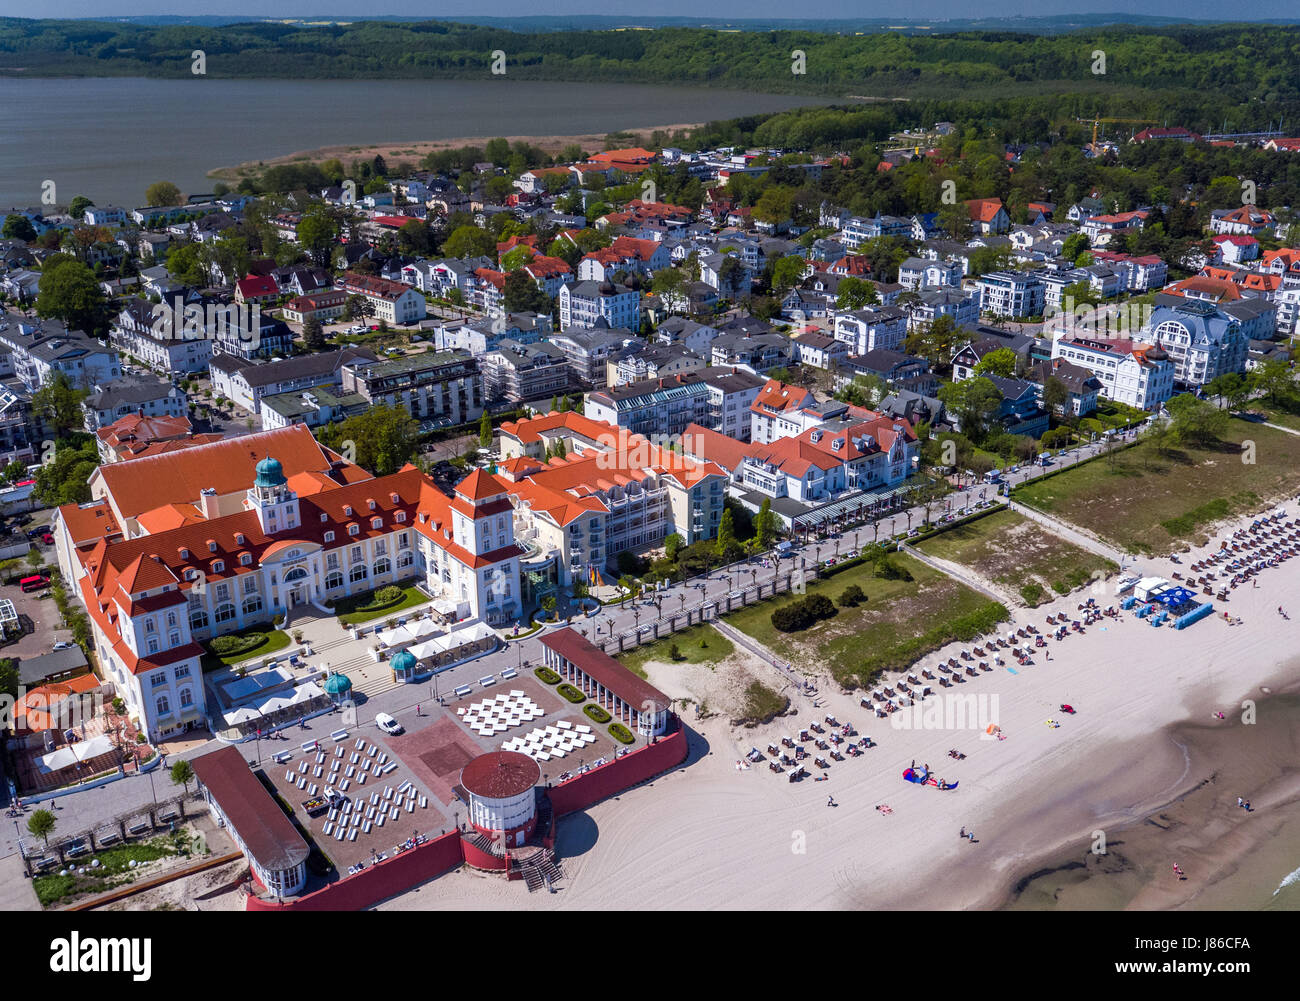 Binz, Germany. 18th May, 2017. The over 100 year old spa house with its adjoining park and the seaside promenade can be seen in Binz, Germany, 18 May 2017. Today the hotel, opened on the 3rd of July 1908, is greeting vacationers. For more than 30 million euros the "Travel Charme Groupe" from Berlin renovated the spa house Binz. It has now been reopened as a five-star-hotel since December 2001. Aerial View Taken with a Drone. Photo: Jens Büttner/dpa-Zentralbild/ZB/dpa/Alamy Live News Stock Photo